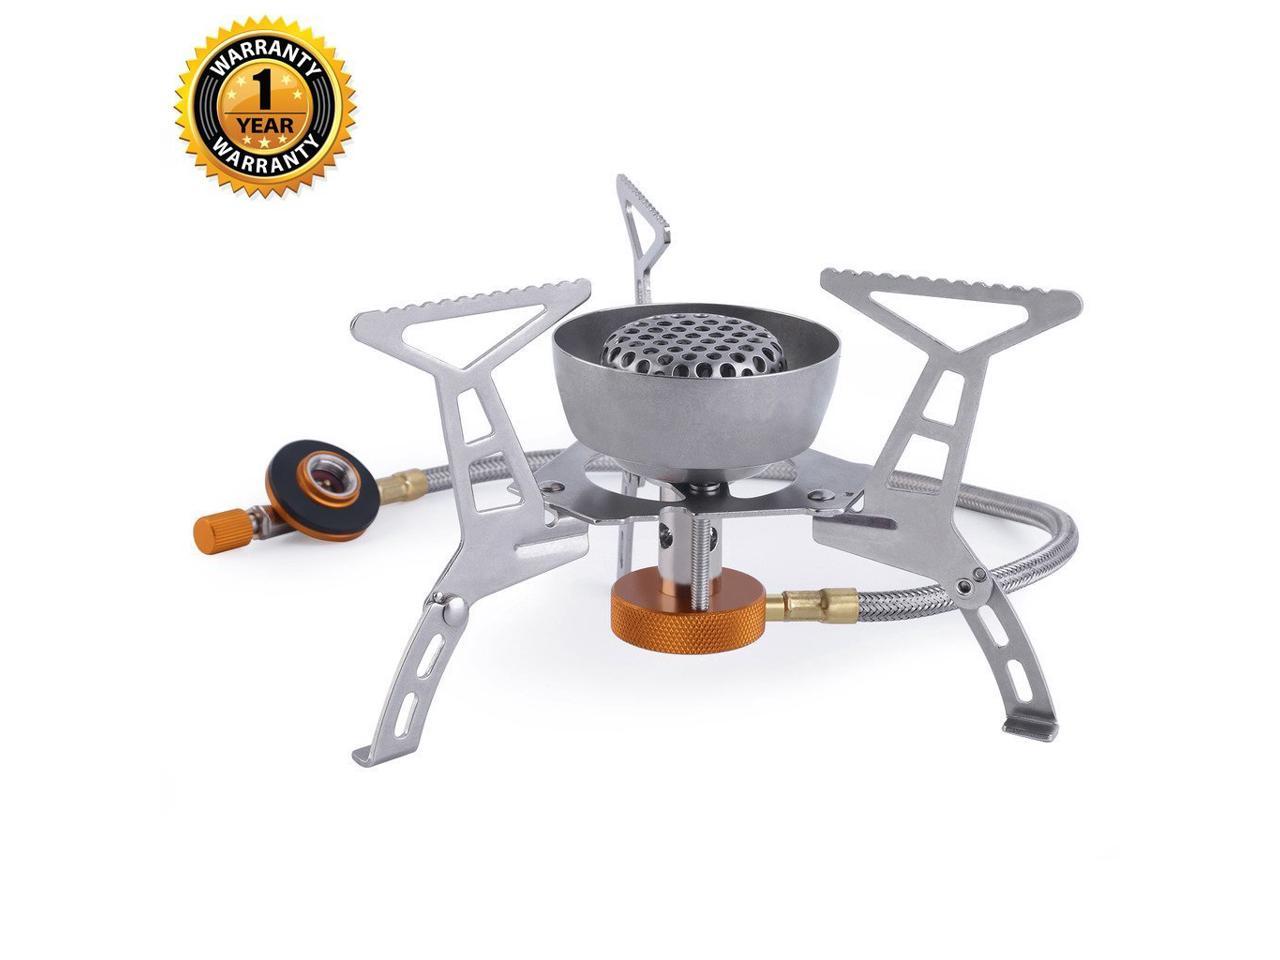 Polaris 2500W Portable Mini Outdoor Stove Compact Camping Hiking Gas Cooker 